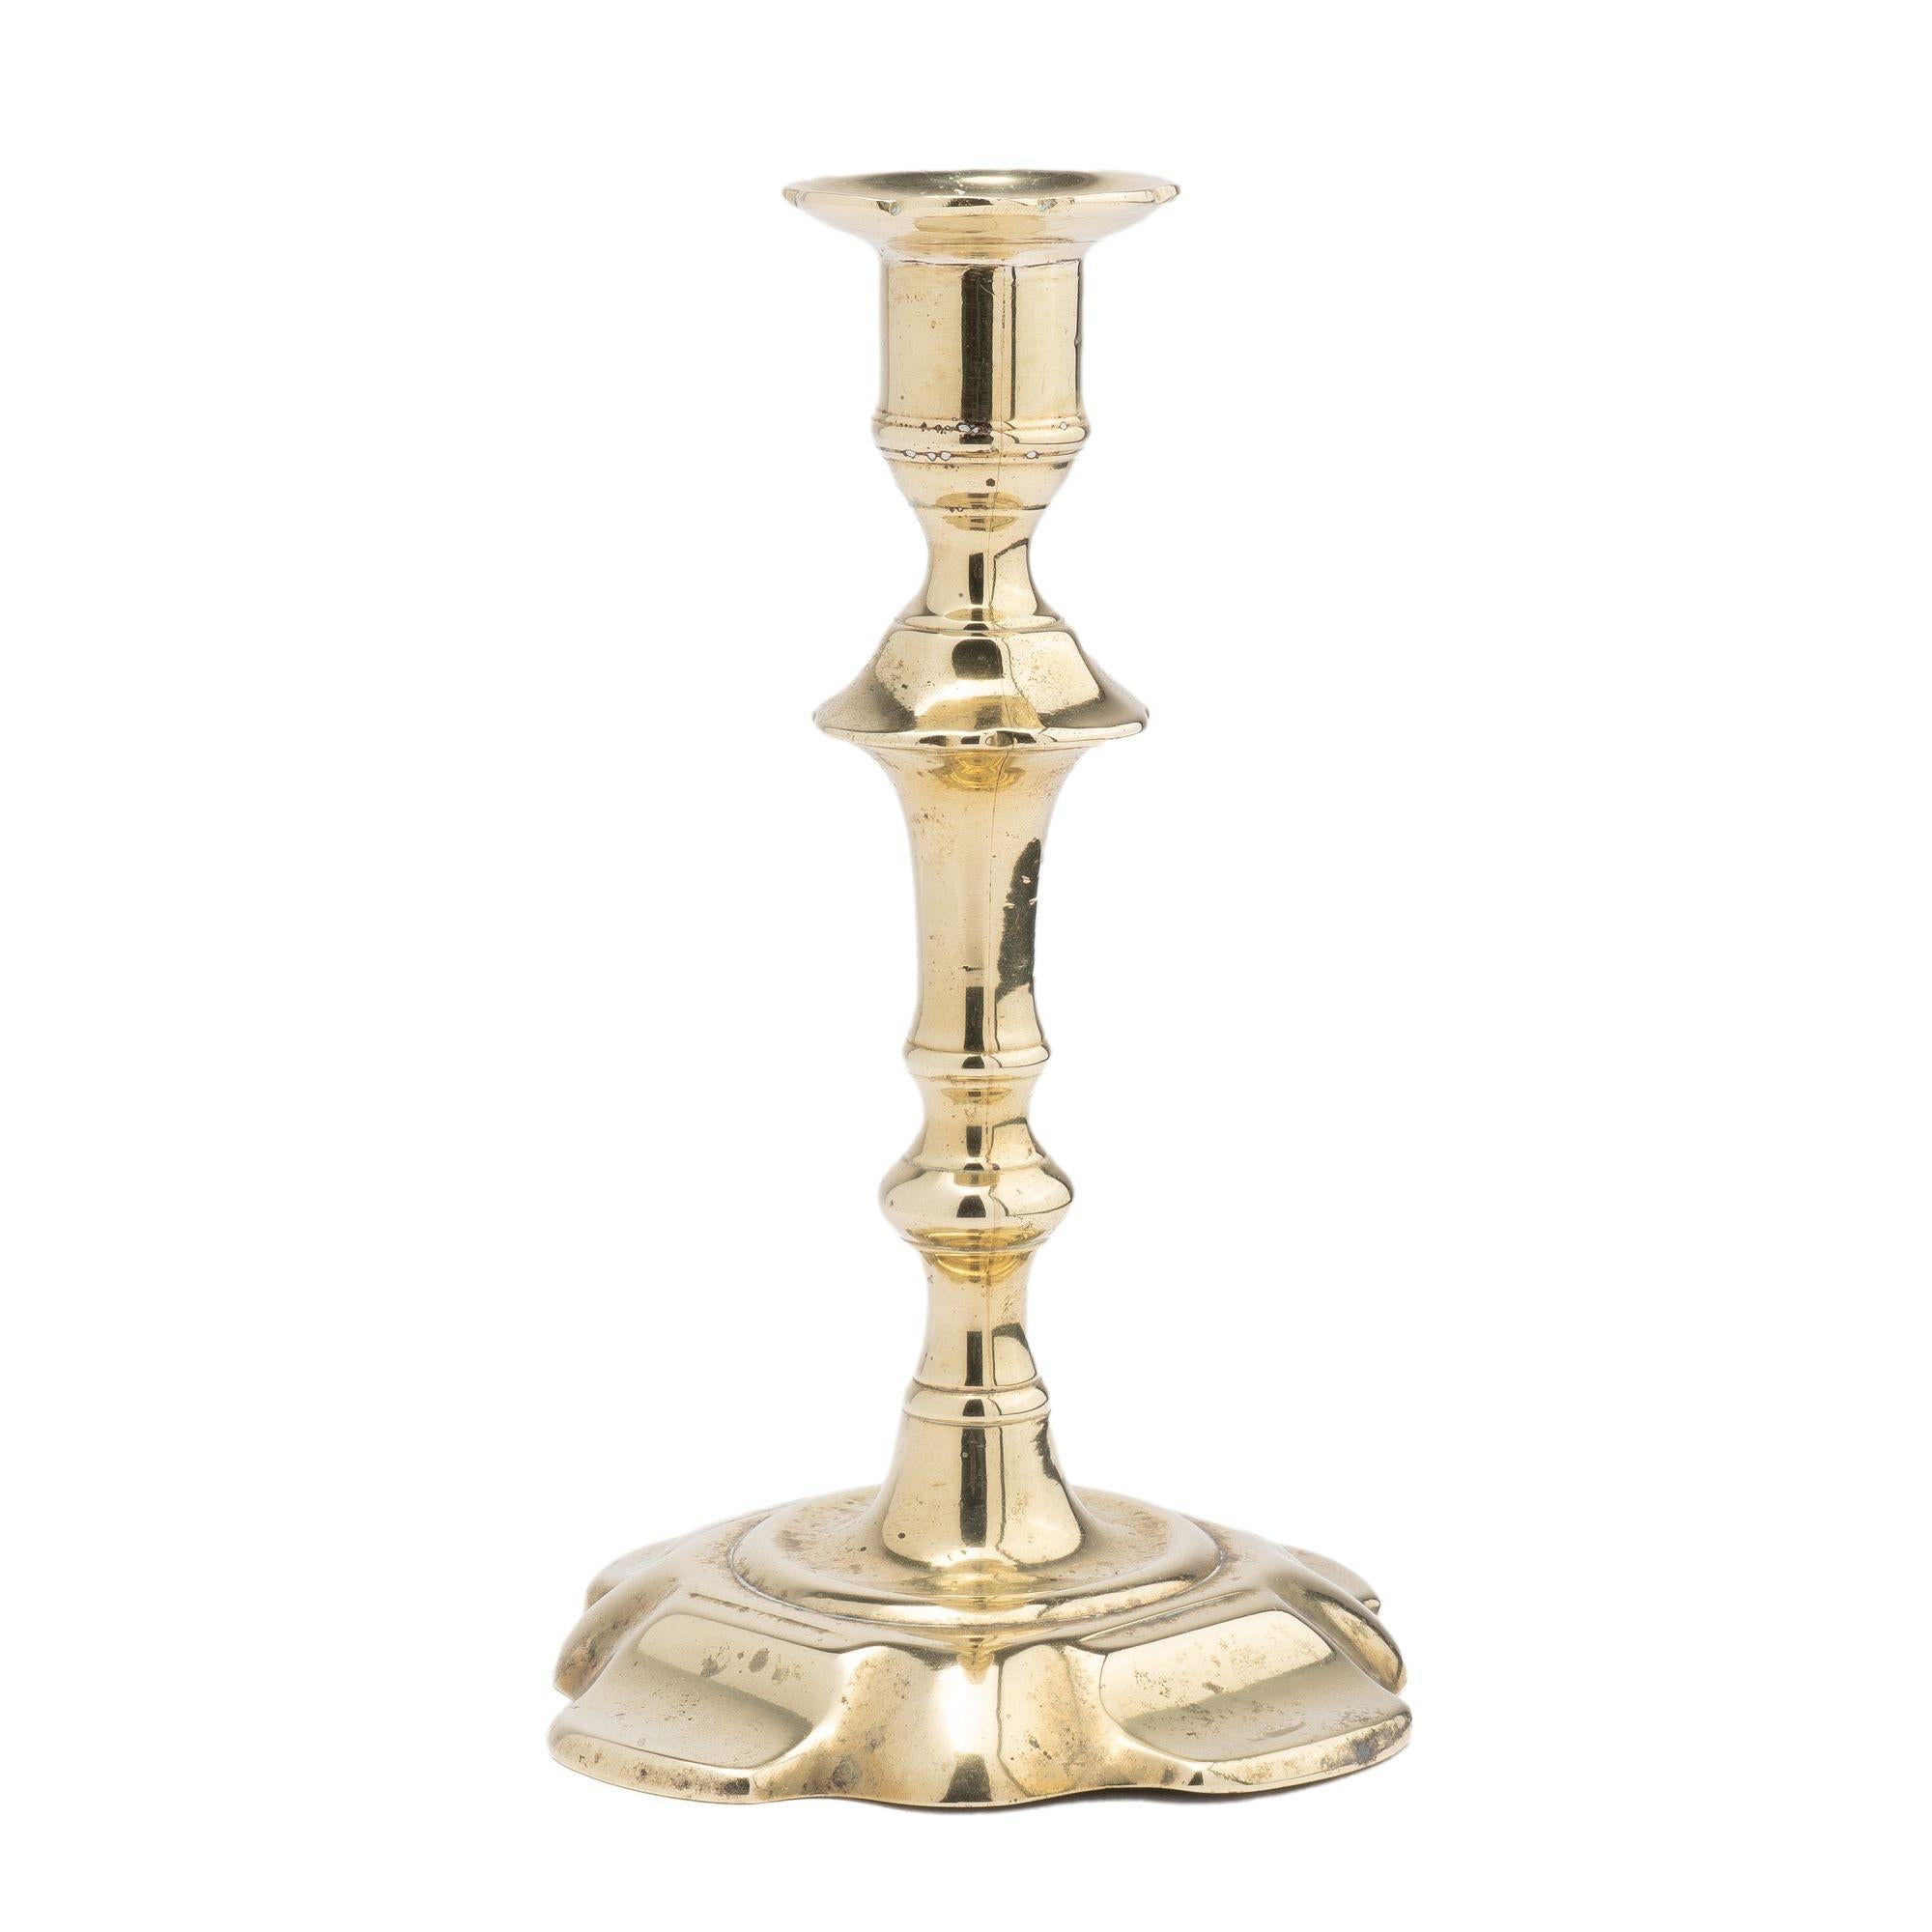 Seam cast brass Queen Anne candlestick. The candlestick features an urn form candle cup with scalloped bobeche on a trumpet turned shaft. The suppressed knob is peened to a cone centered on a shallow dished circle resting on an extended petal